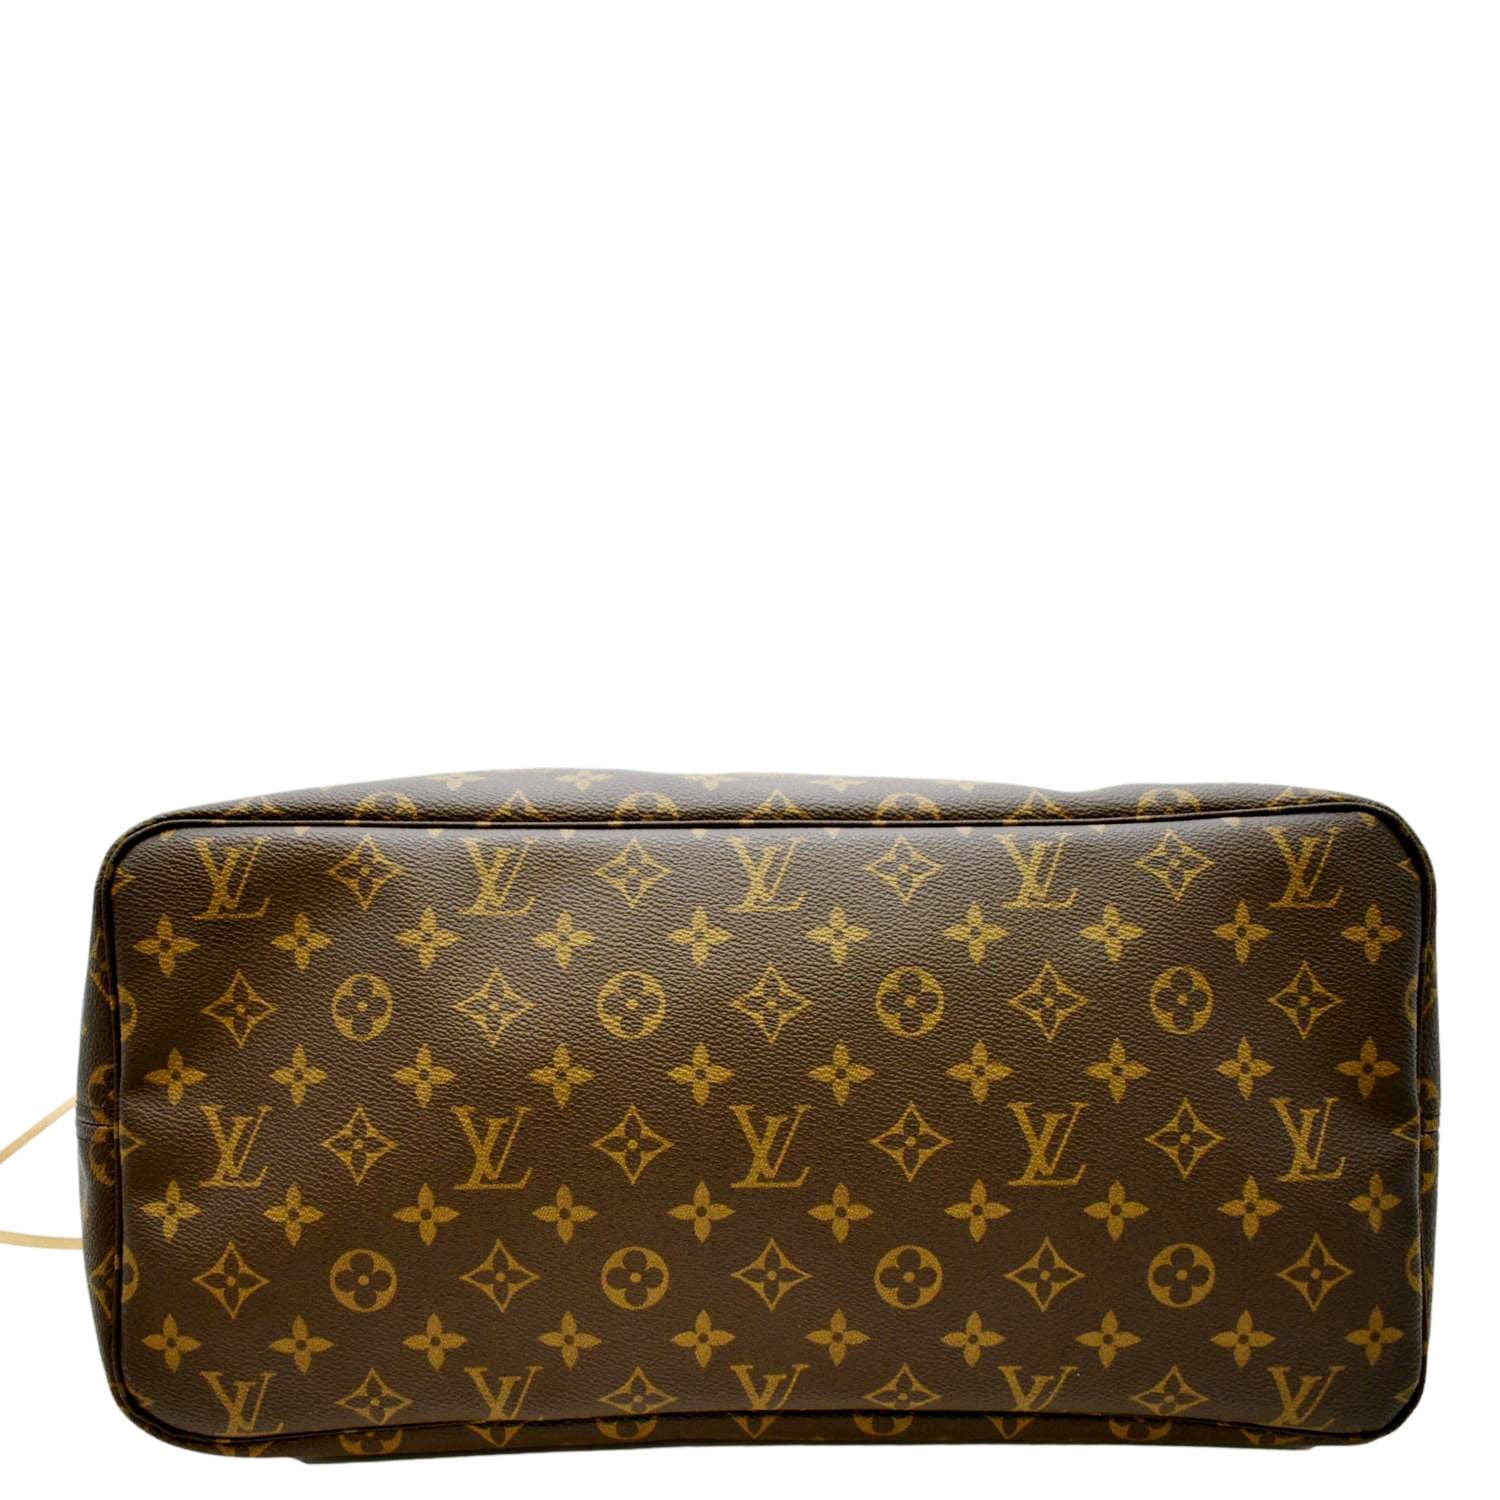 Authentic Louis Vuitton Neverfull GM monogram - Bags & Luggage